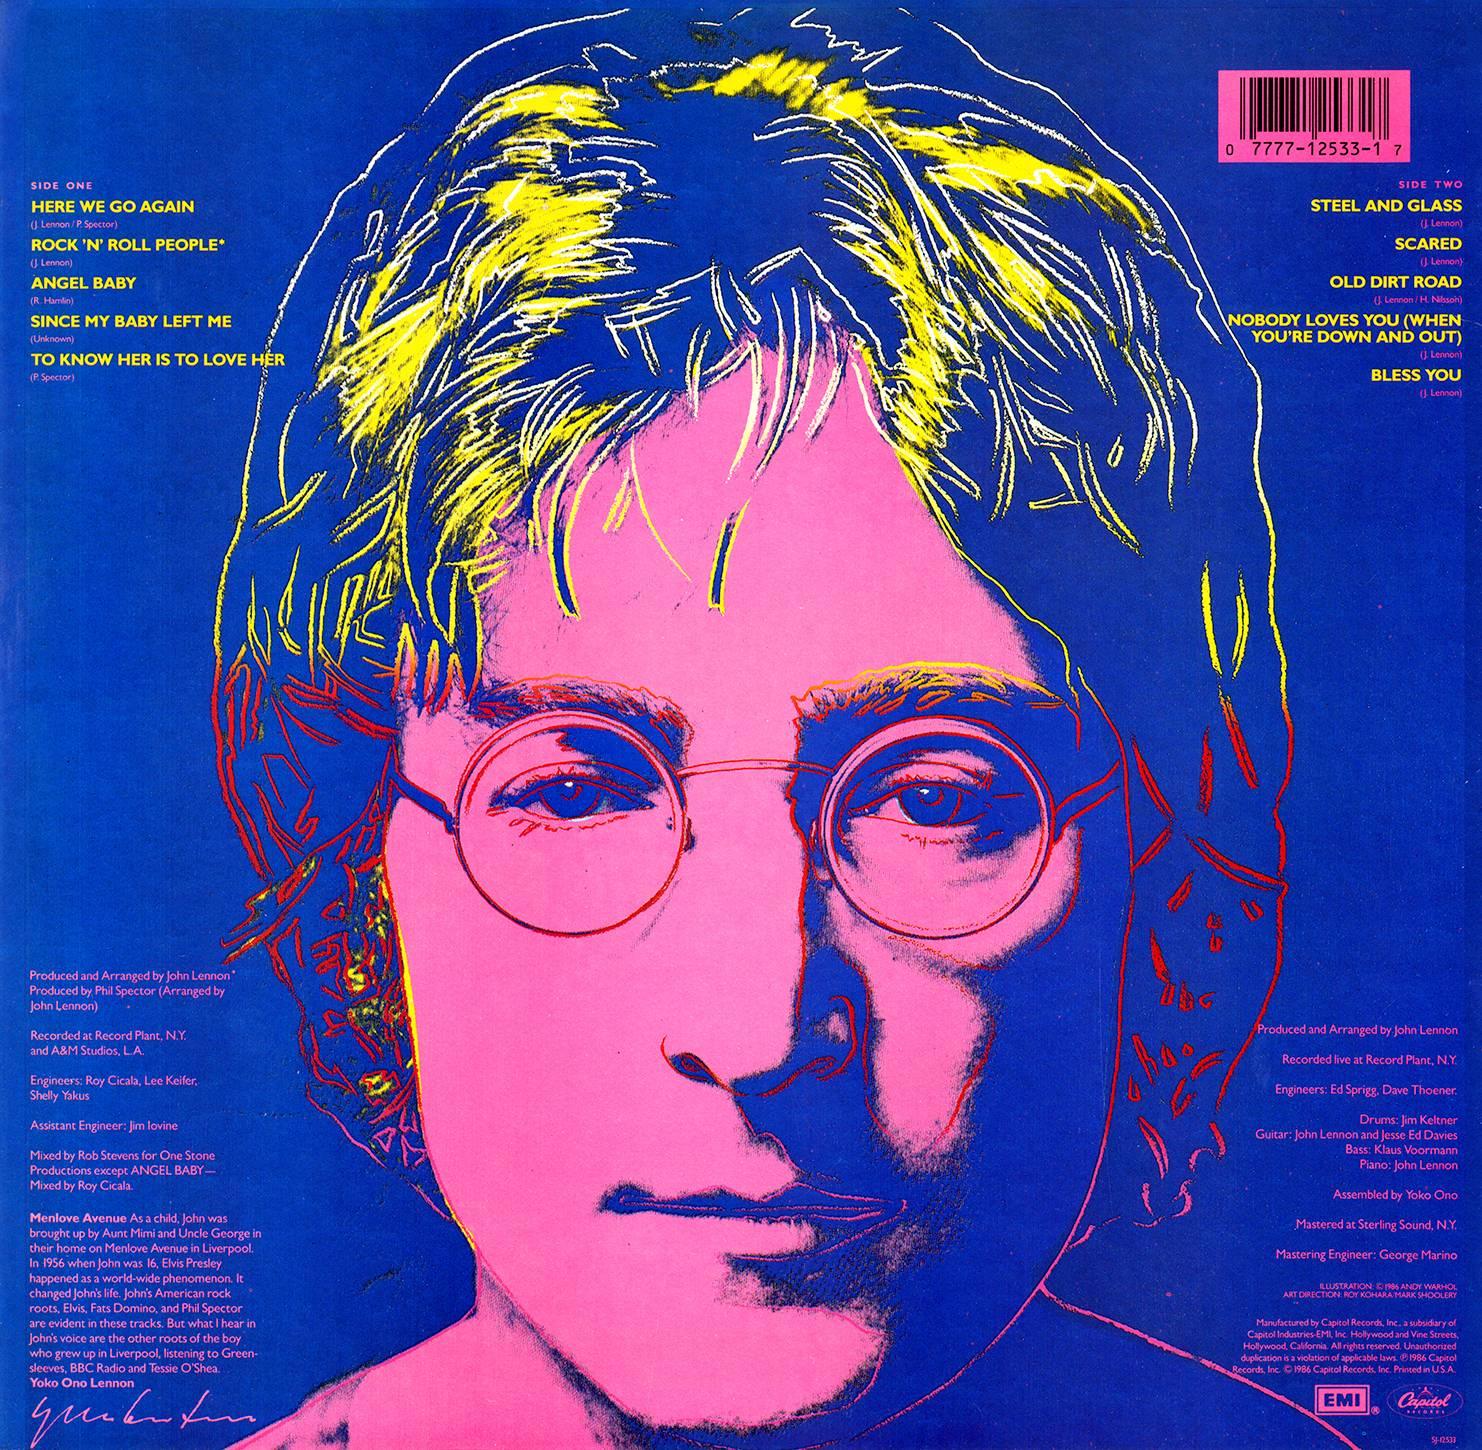 Andy Warhol, John Lennon 1986
Rare sought-after Andy Warhol John Lennon Vinyl Record Art:
Offset illustrated by Andy Warhol shortly before his death in 1986 for the estate of John Lennon/Capital Records. 

Off-Set Print on Vinyl Record Cover
12 x 12